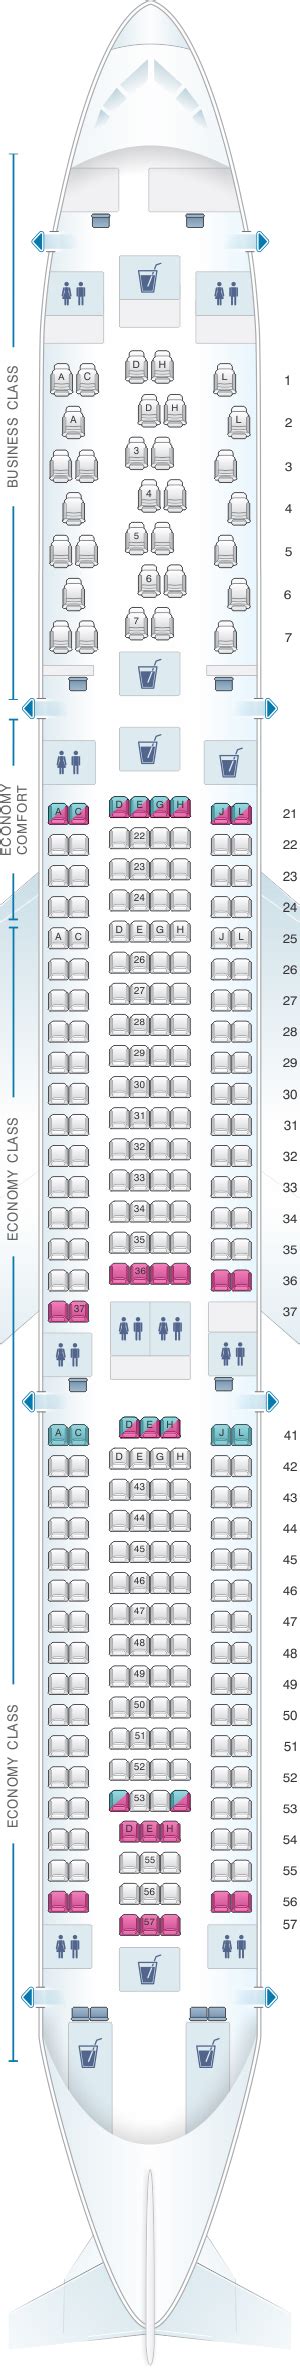 Airbus A350 900ulr Seat Map Image To U